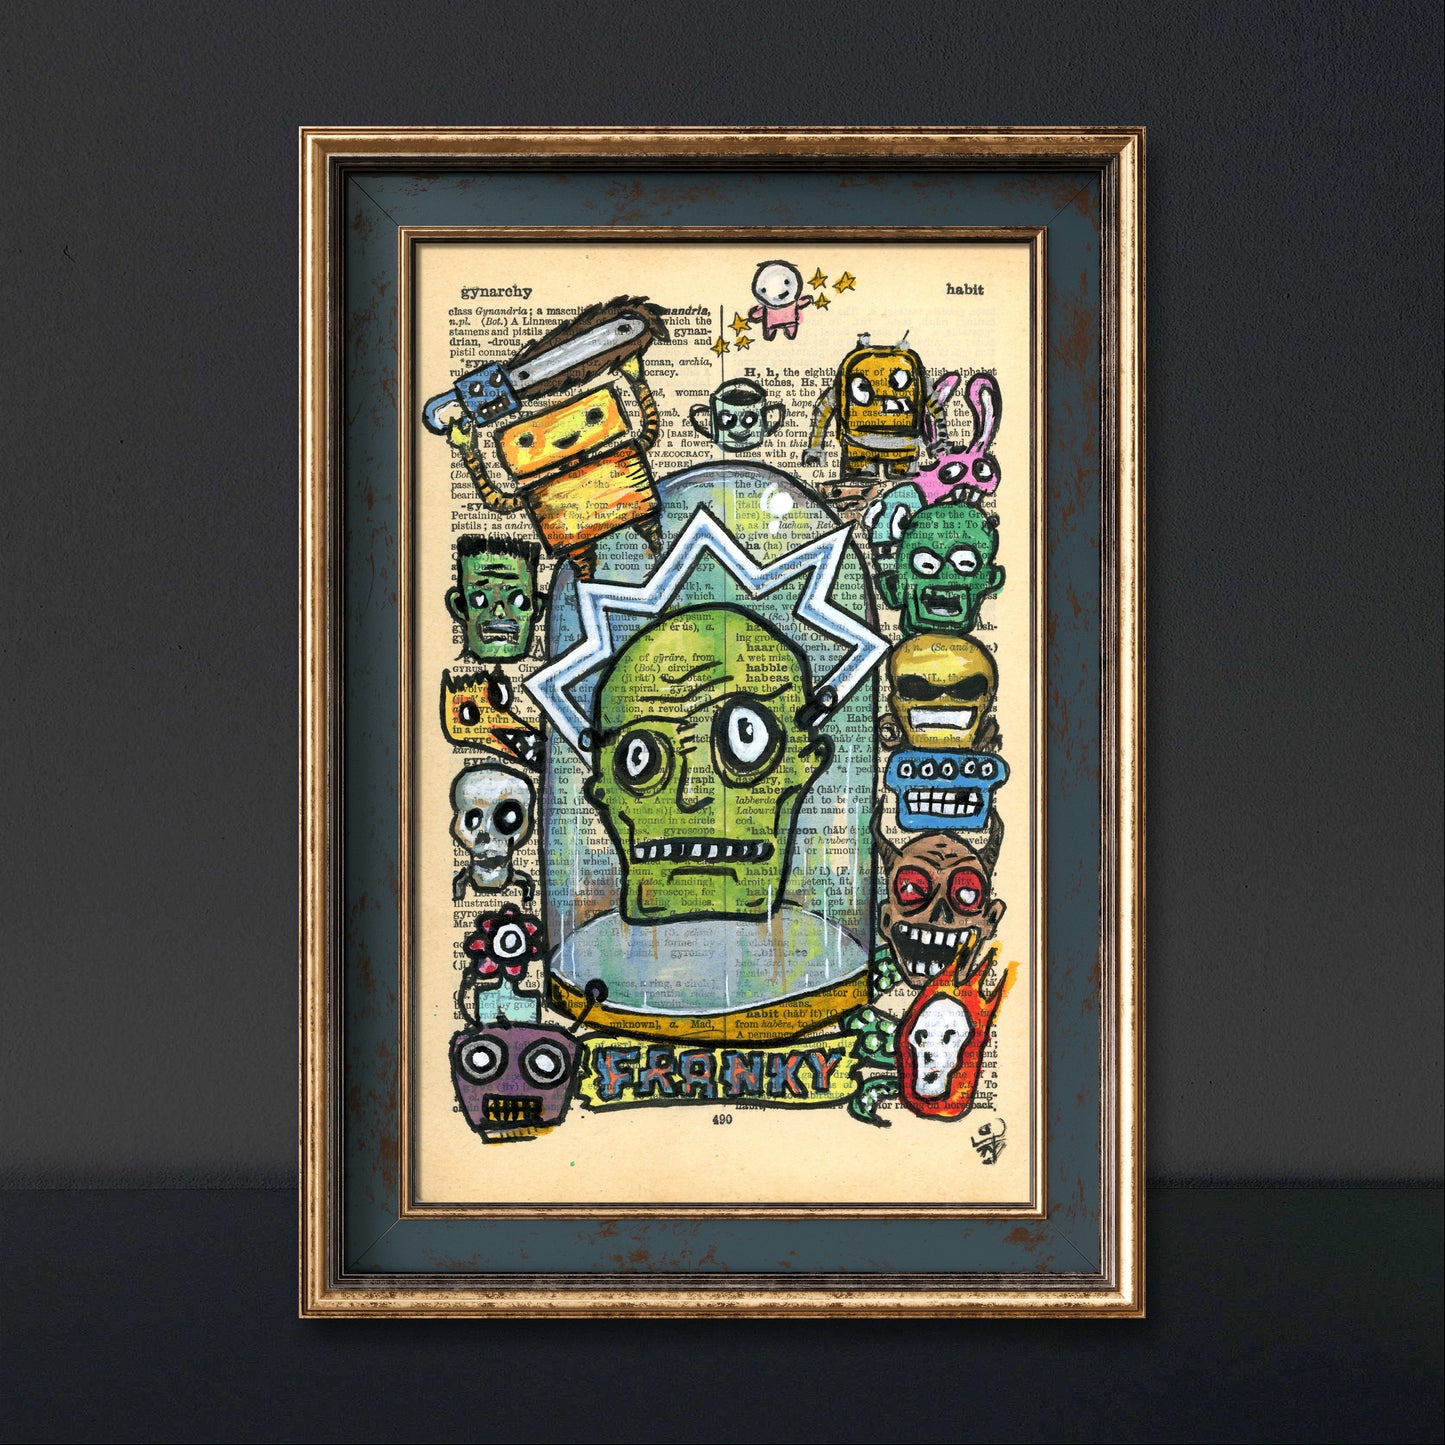 Acrylic and marker art of Franky in a glass jar with a whimsical style on an upcycled dictionary page.